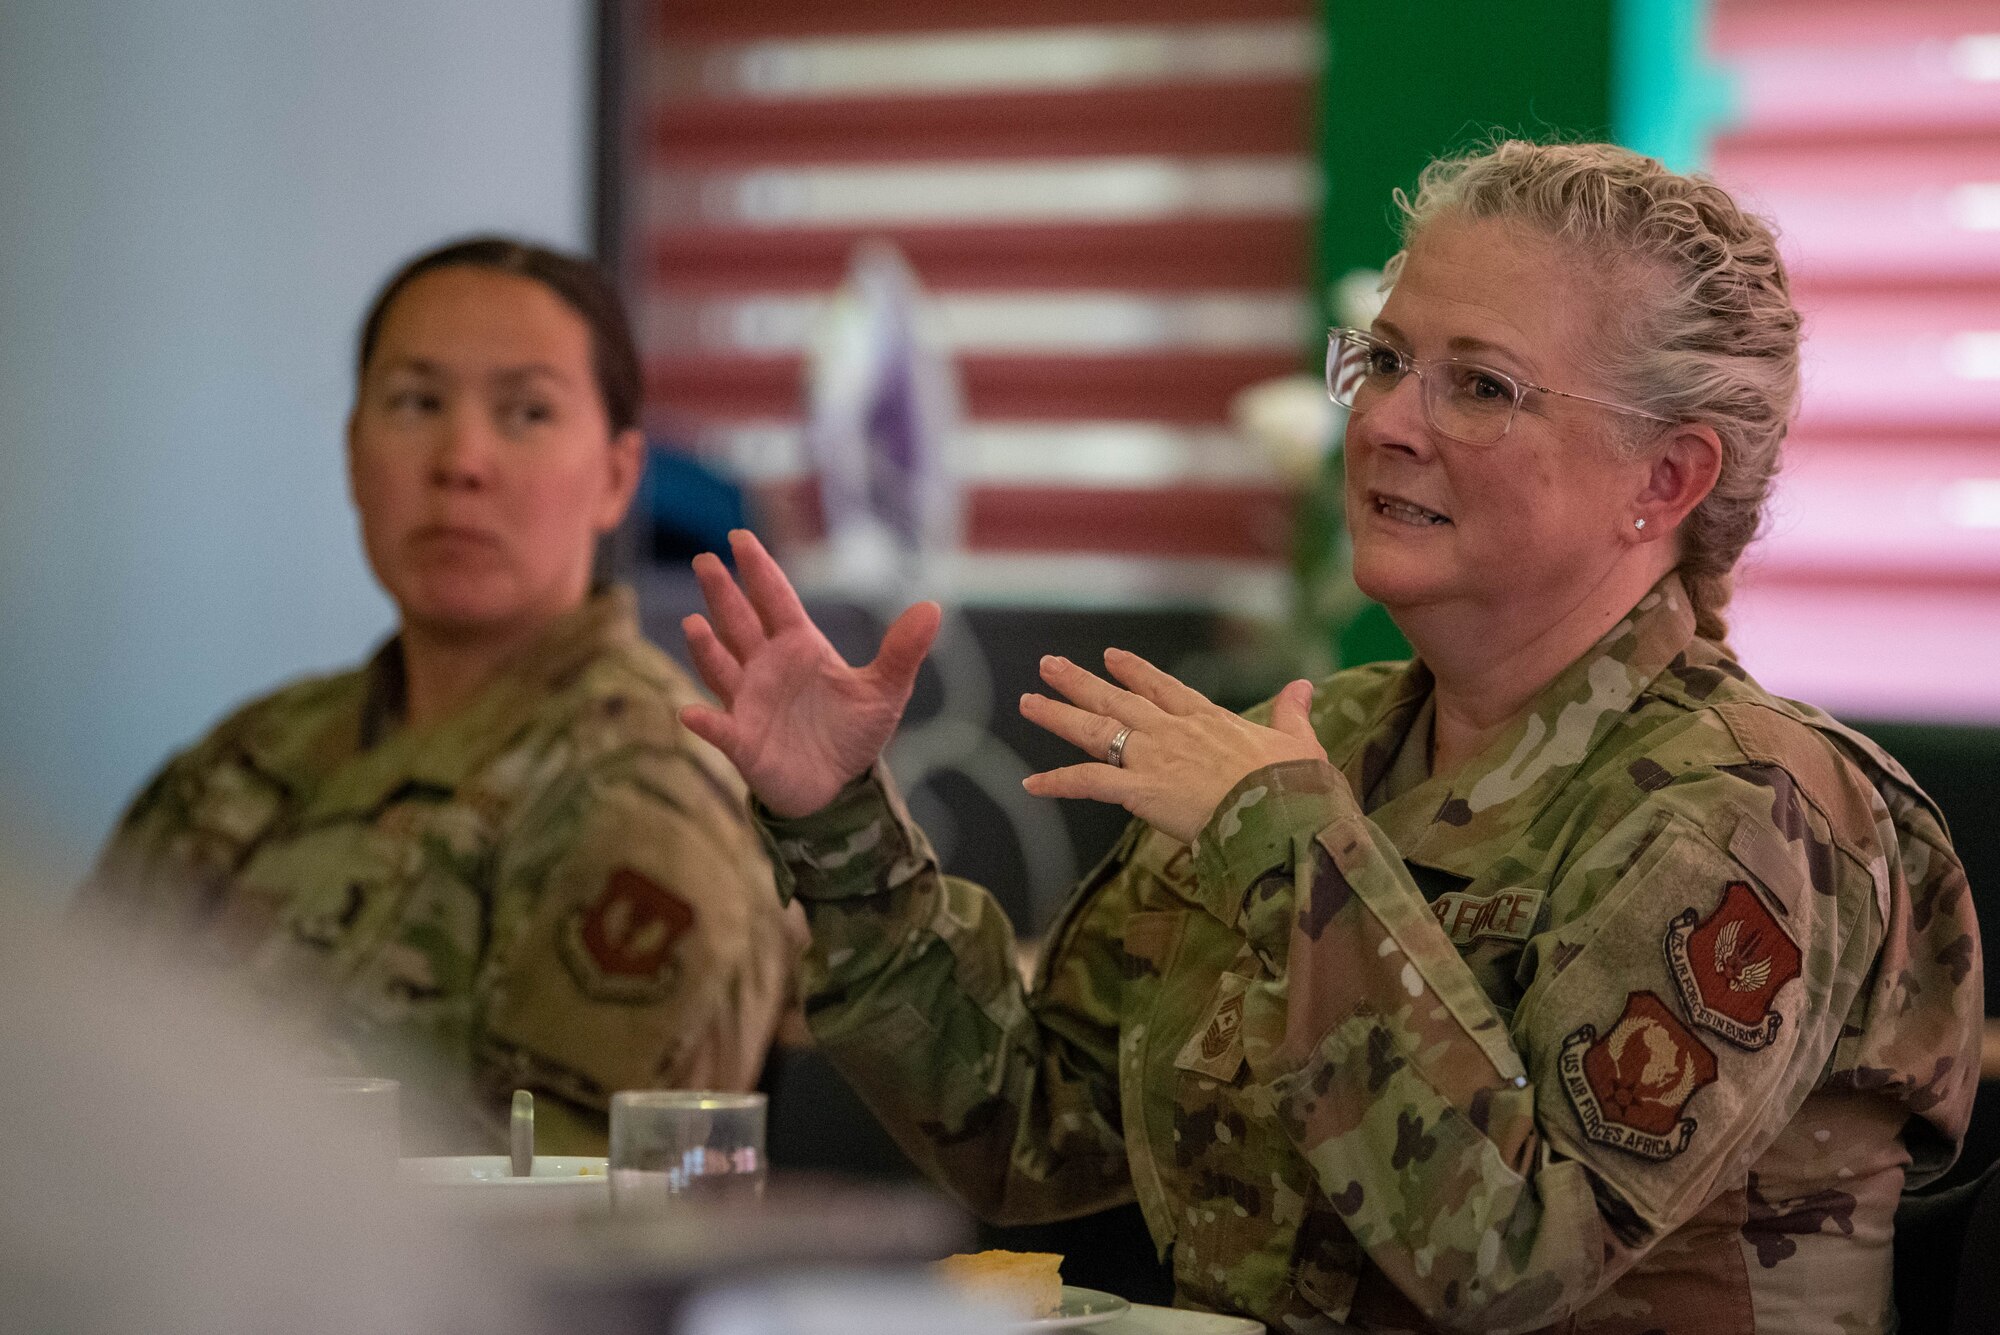 U.S. Air Force Chief Master Sgt. Stephanie Cates, Third Air Force command chief, sits down for lunch with Airmen during a visit